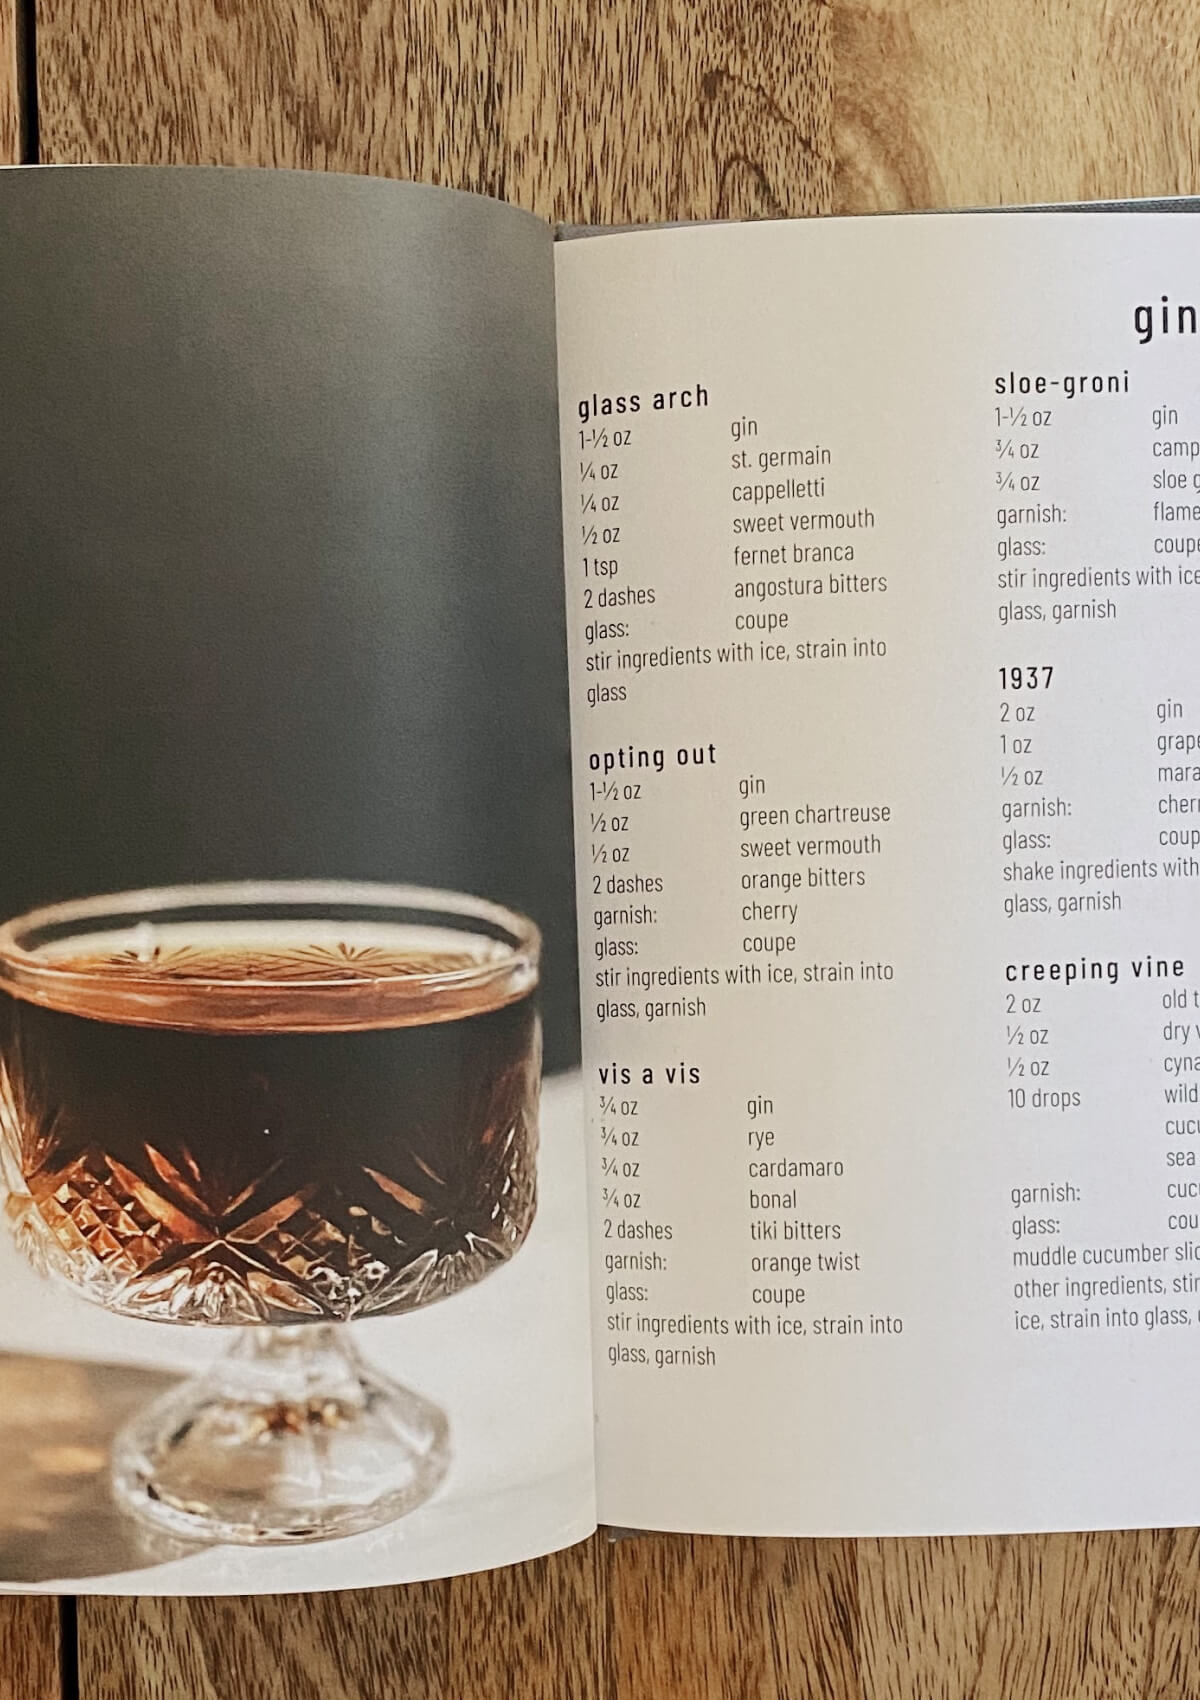 Interior page of cocktail book with recipes